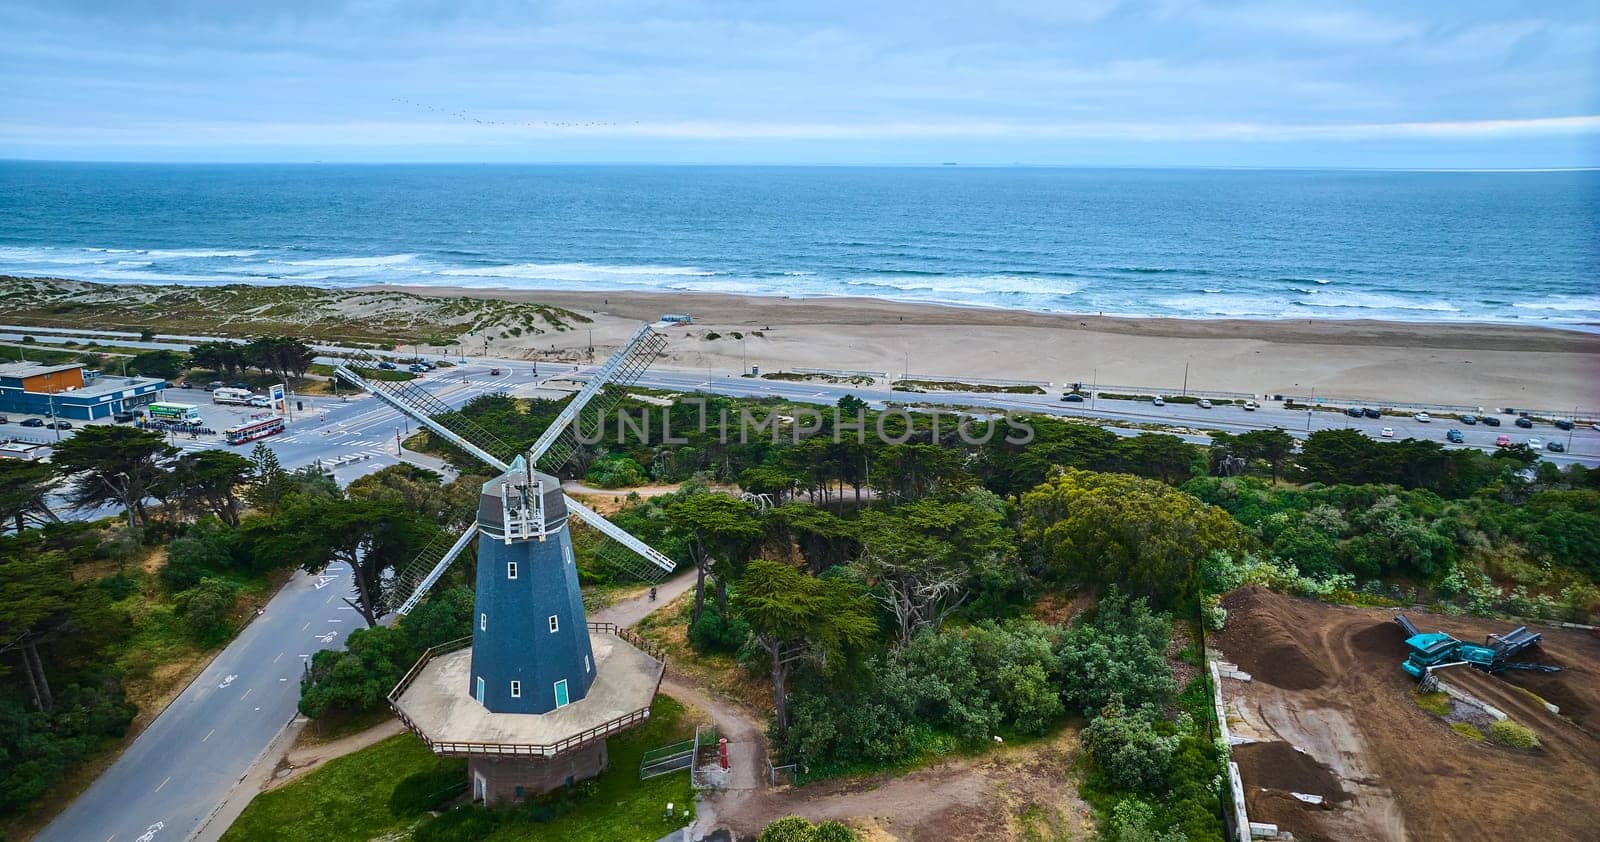 Image of Aerial blue murphy windmill with white blades in grove of trees with sandy beach and ocean waves